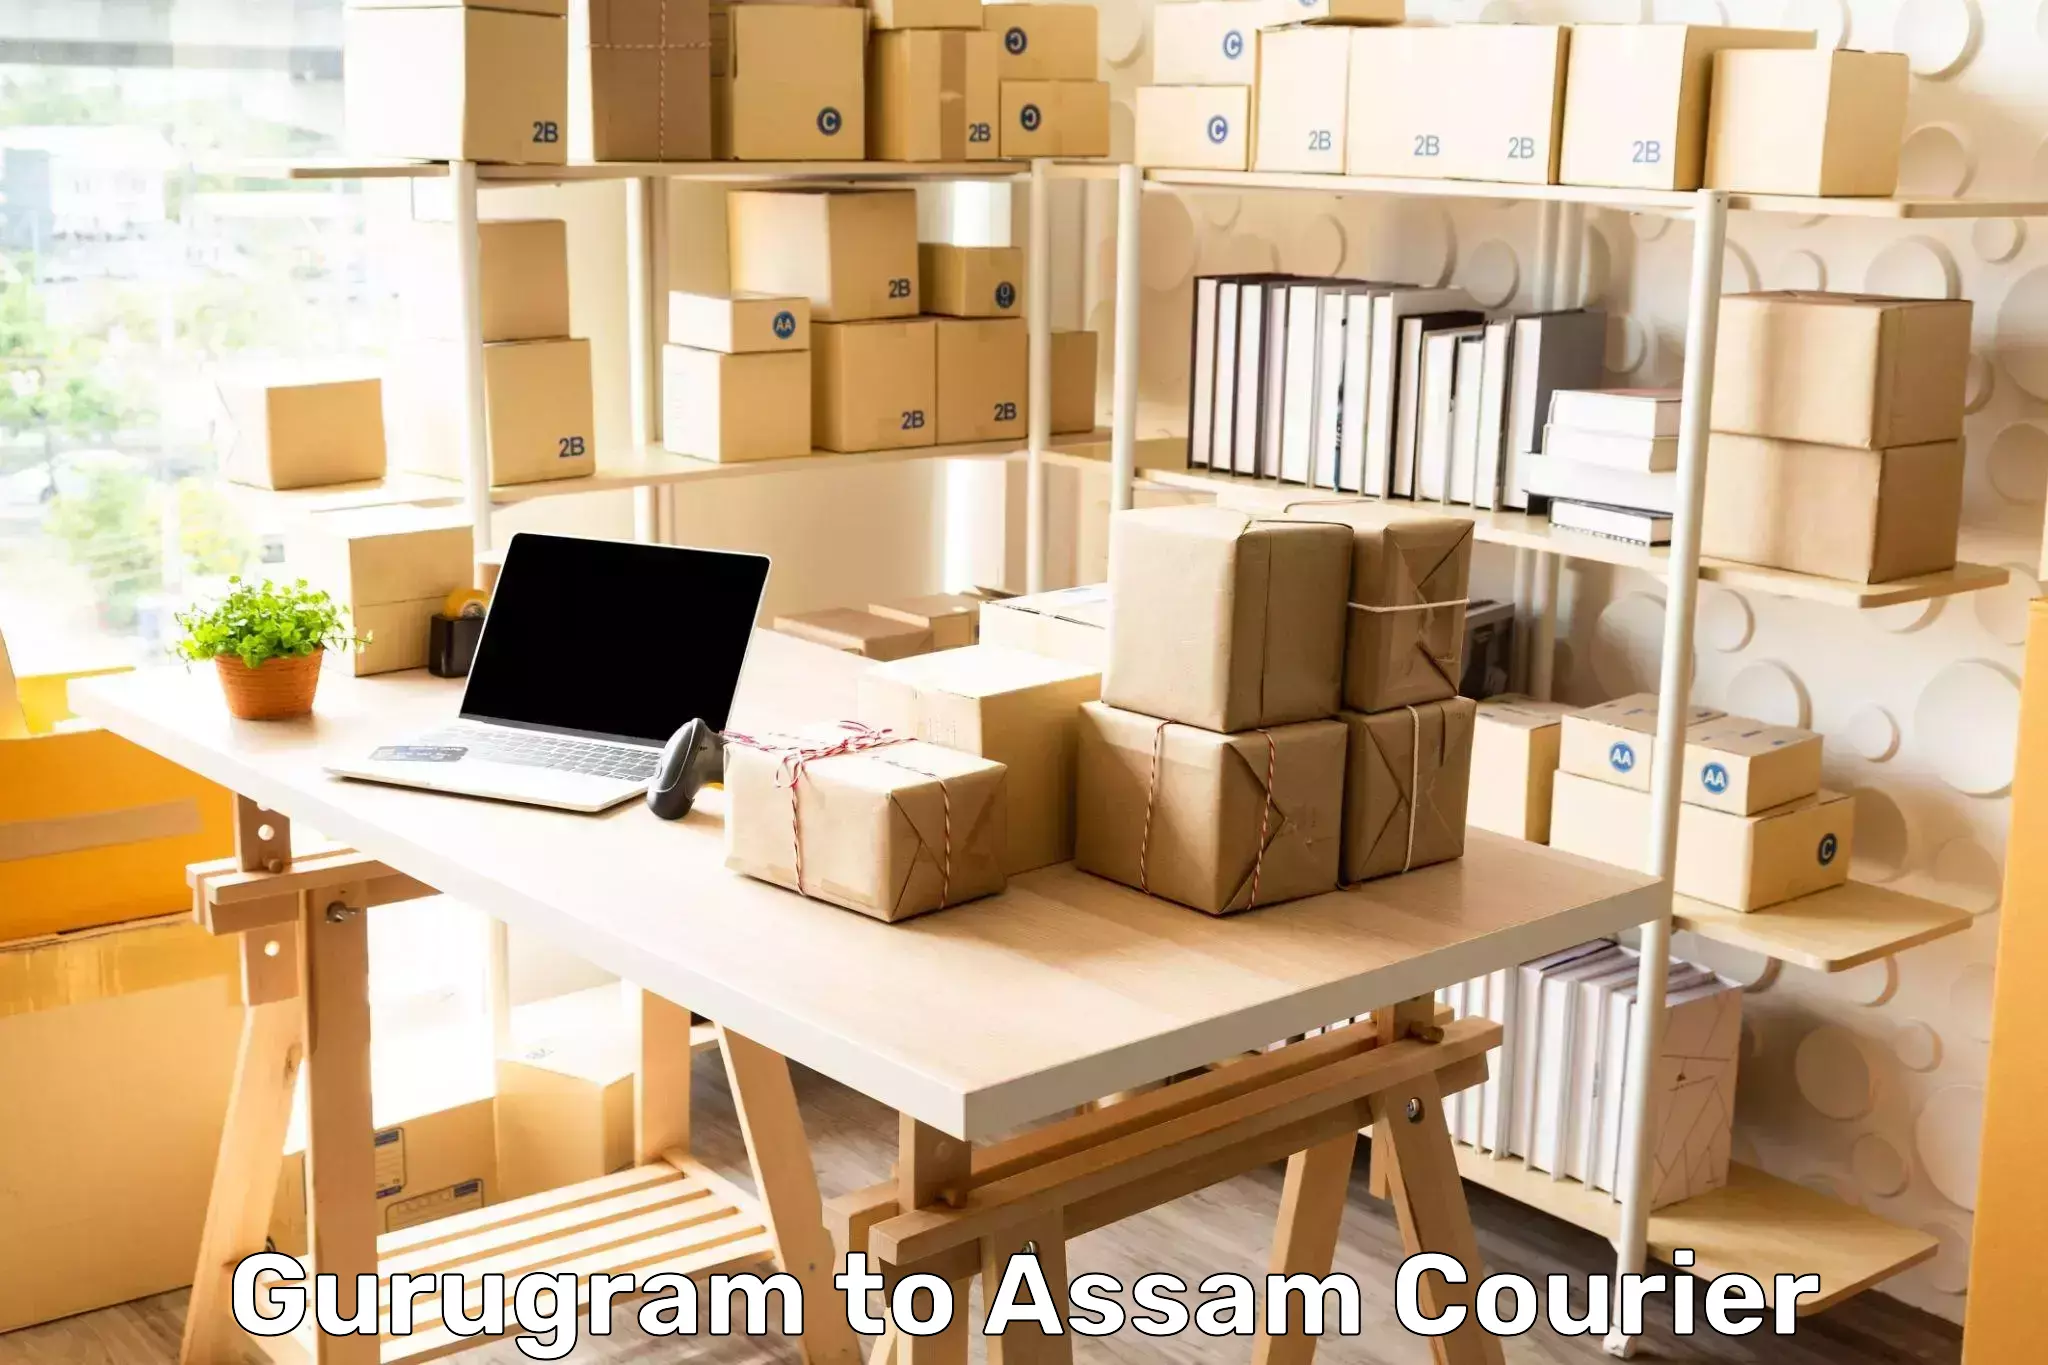 Business delivery service Gurugram to Assam